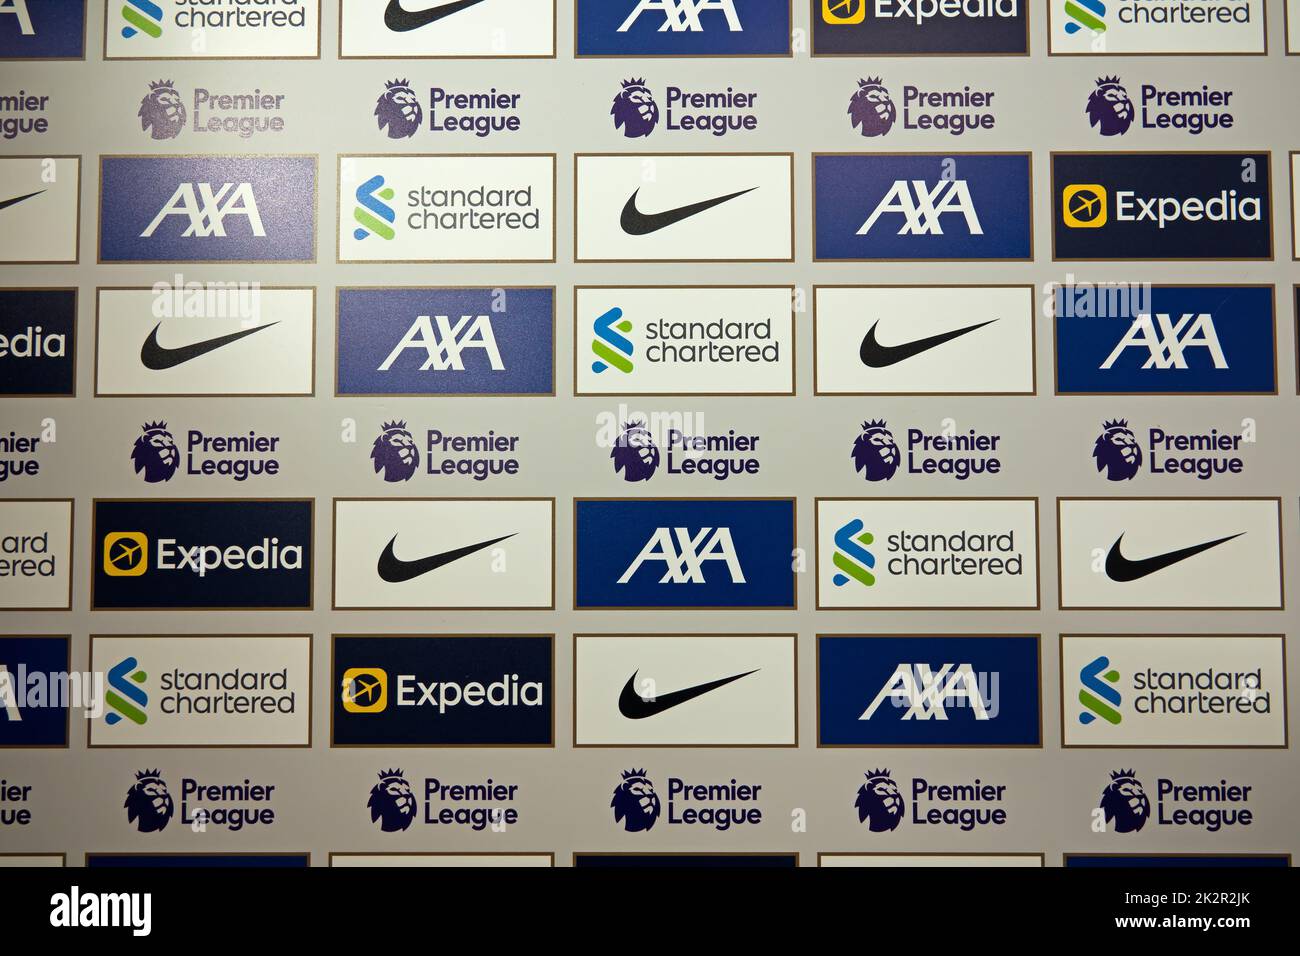 Sponsors names backdrop used when TV interviews players after a match at Anfield Liverpool FC Stock Photo